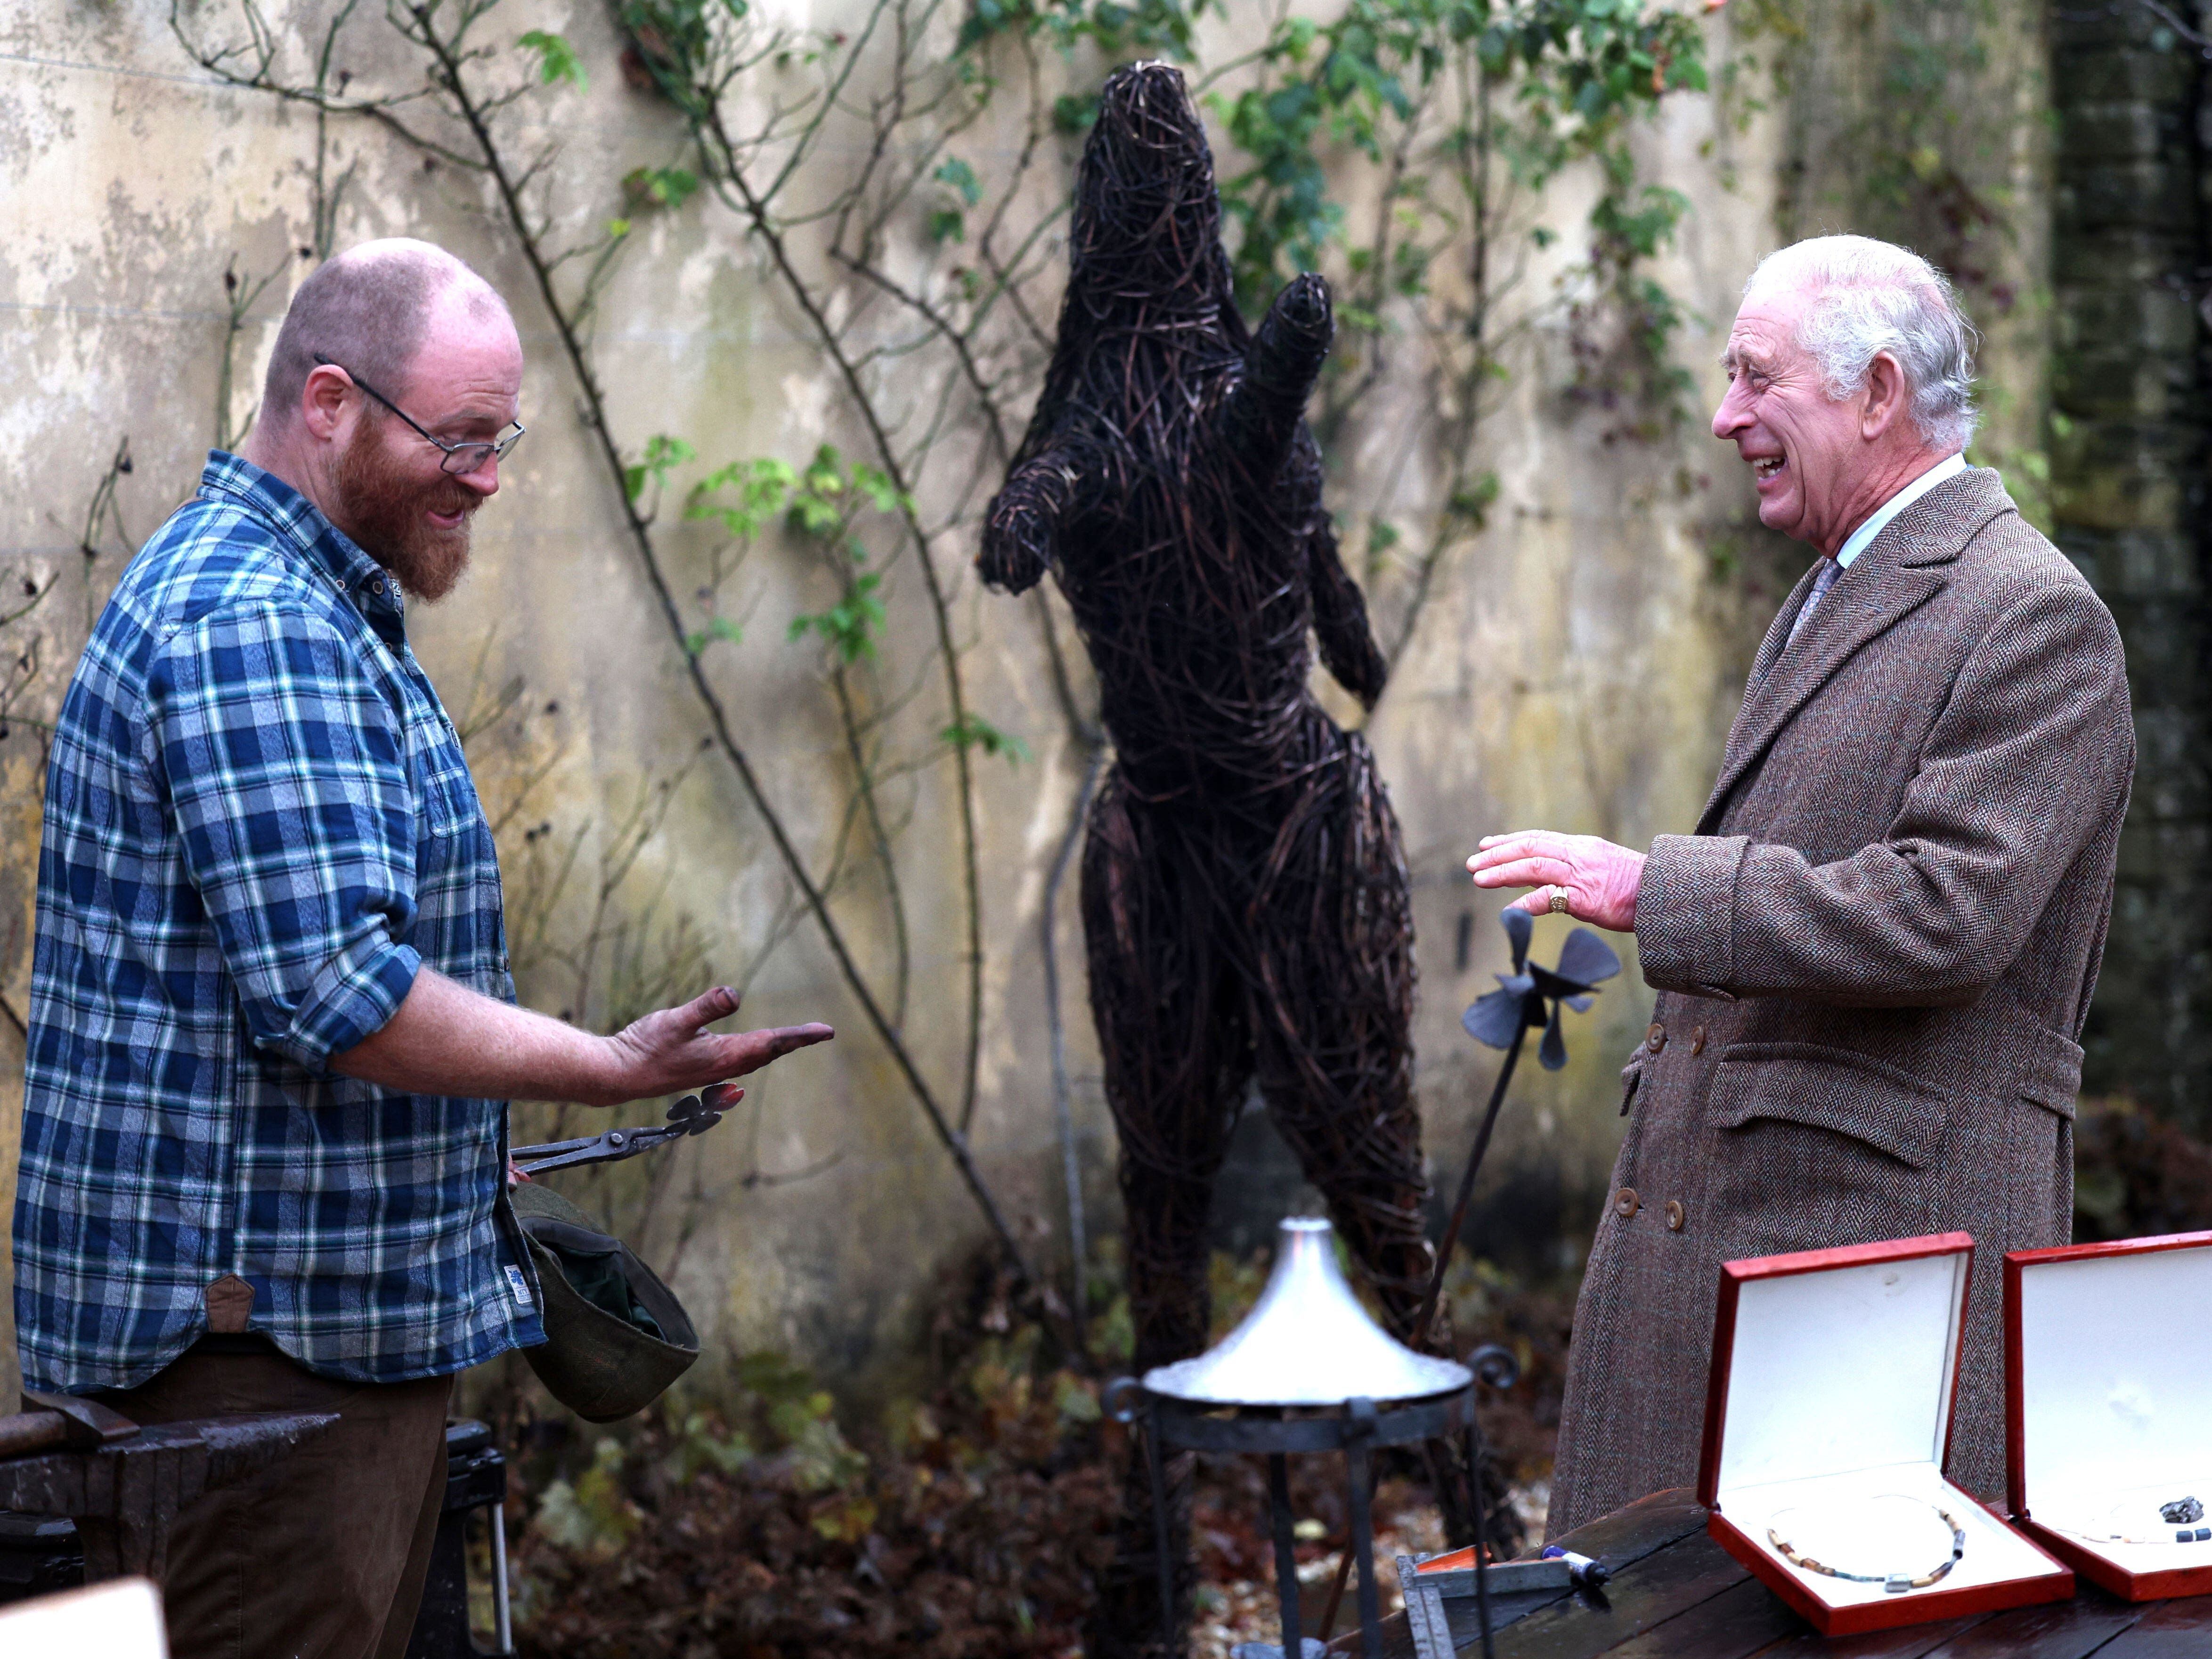 Hands off! Charles declines traditional greeting with dusty blacksmith